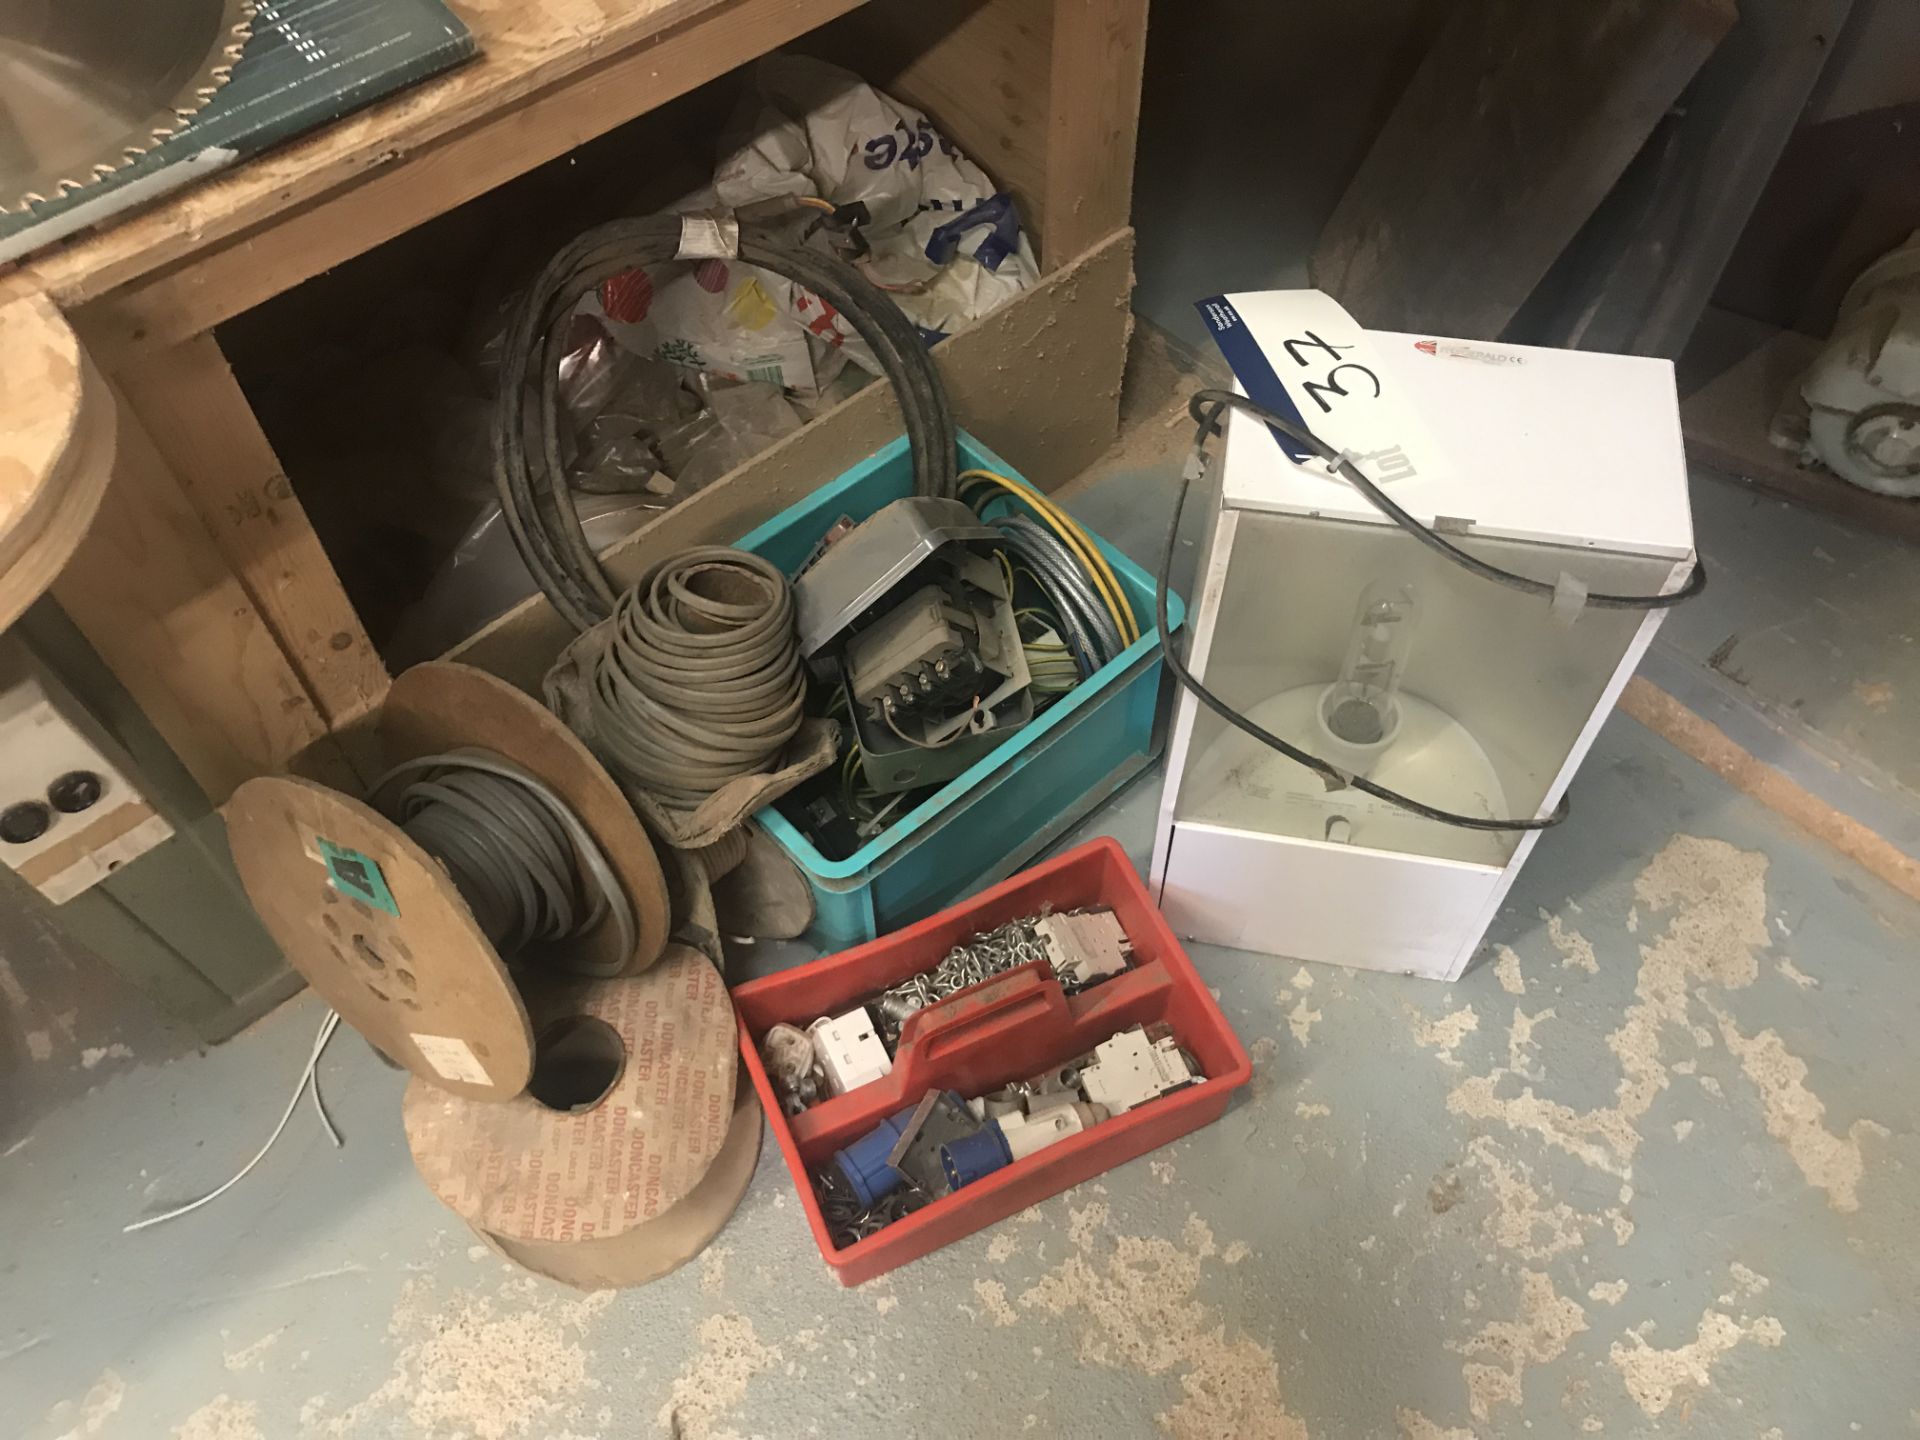 Assorted Cable and Electrical Equipment, as set out (note zero vat on hammer price, however vat will